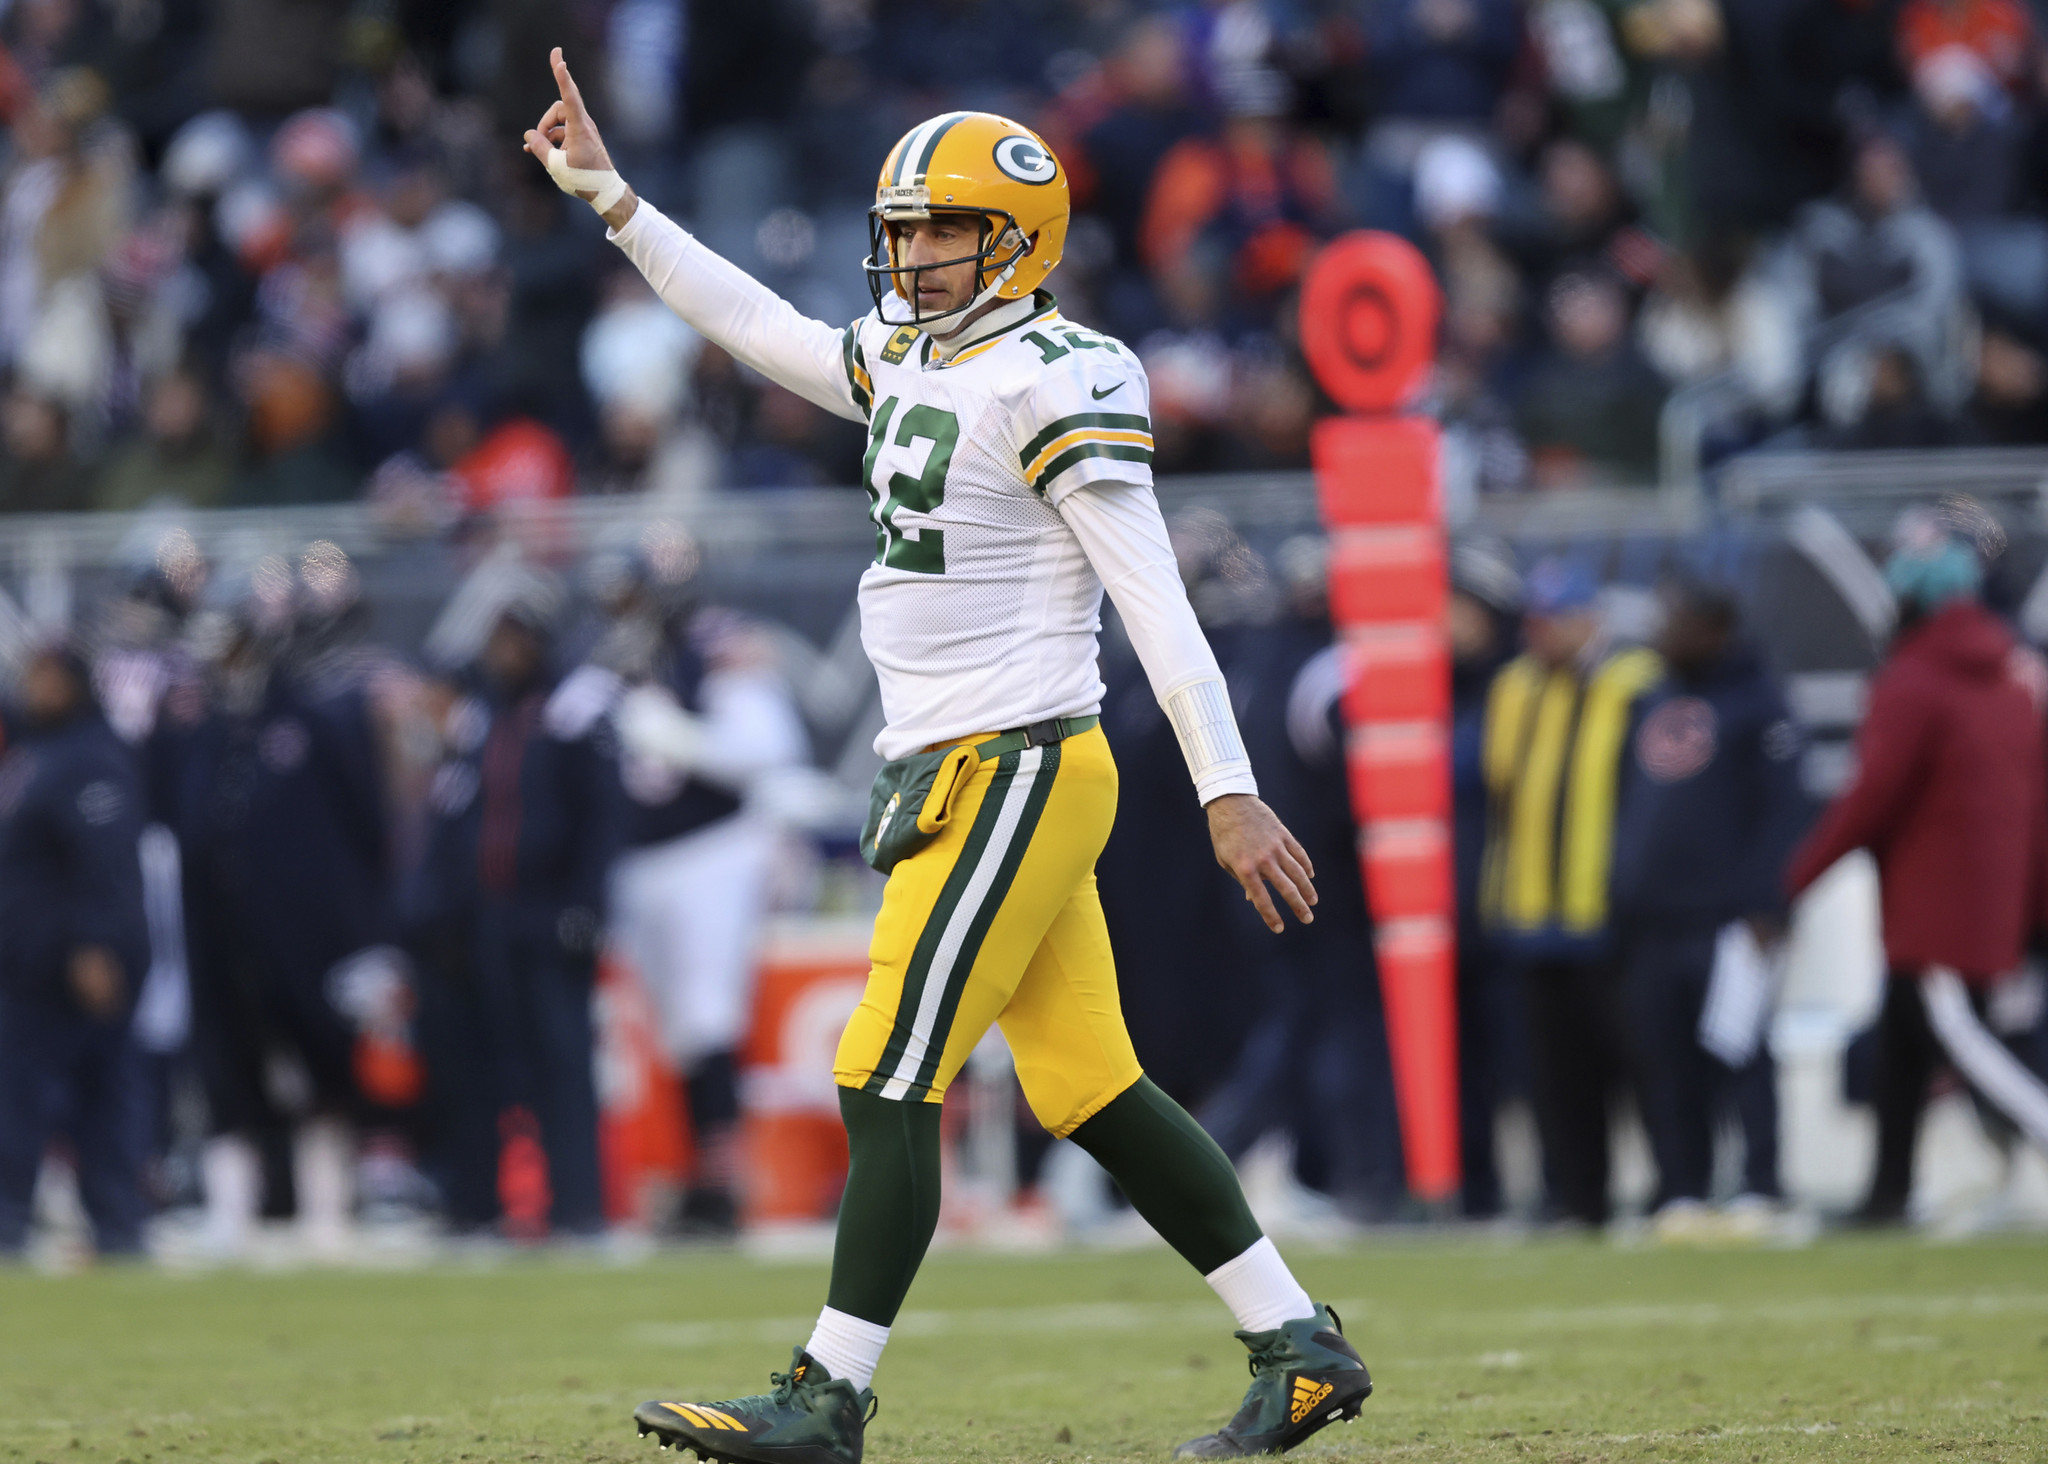 Packers complete second half comeback to top Bears 28-19